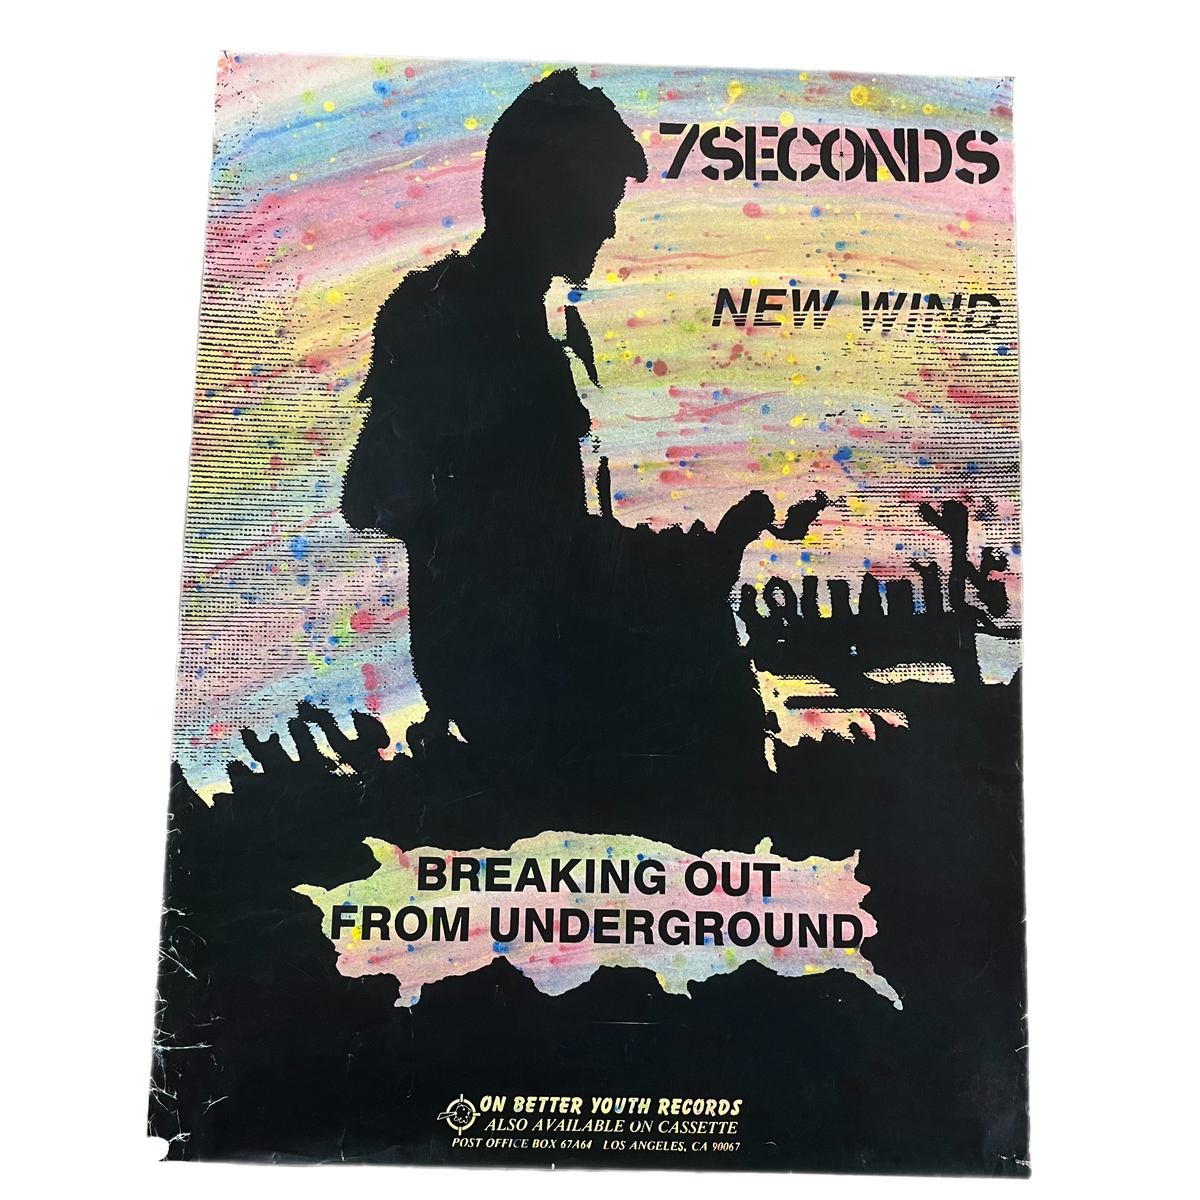 Vintage 7 Seconds &quot;New Wind&quot; Better Youth Records Promotional Poster